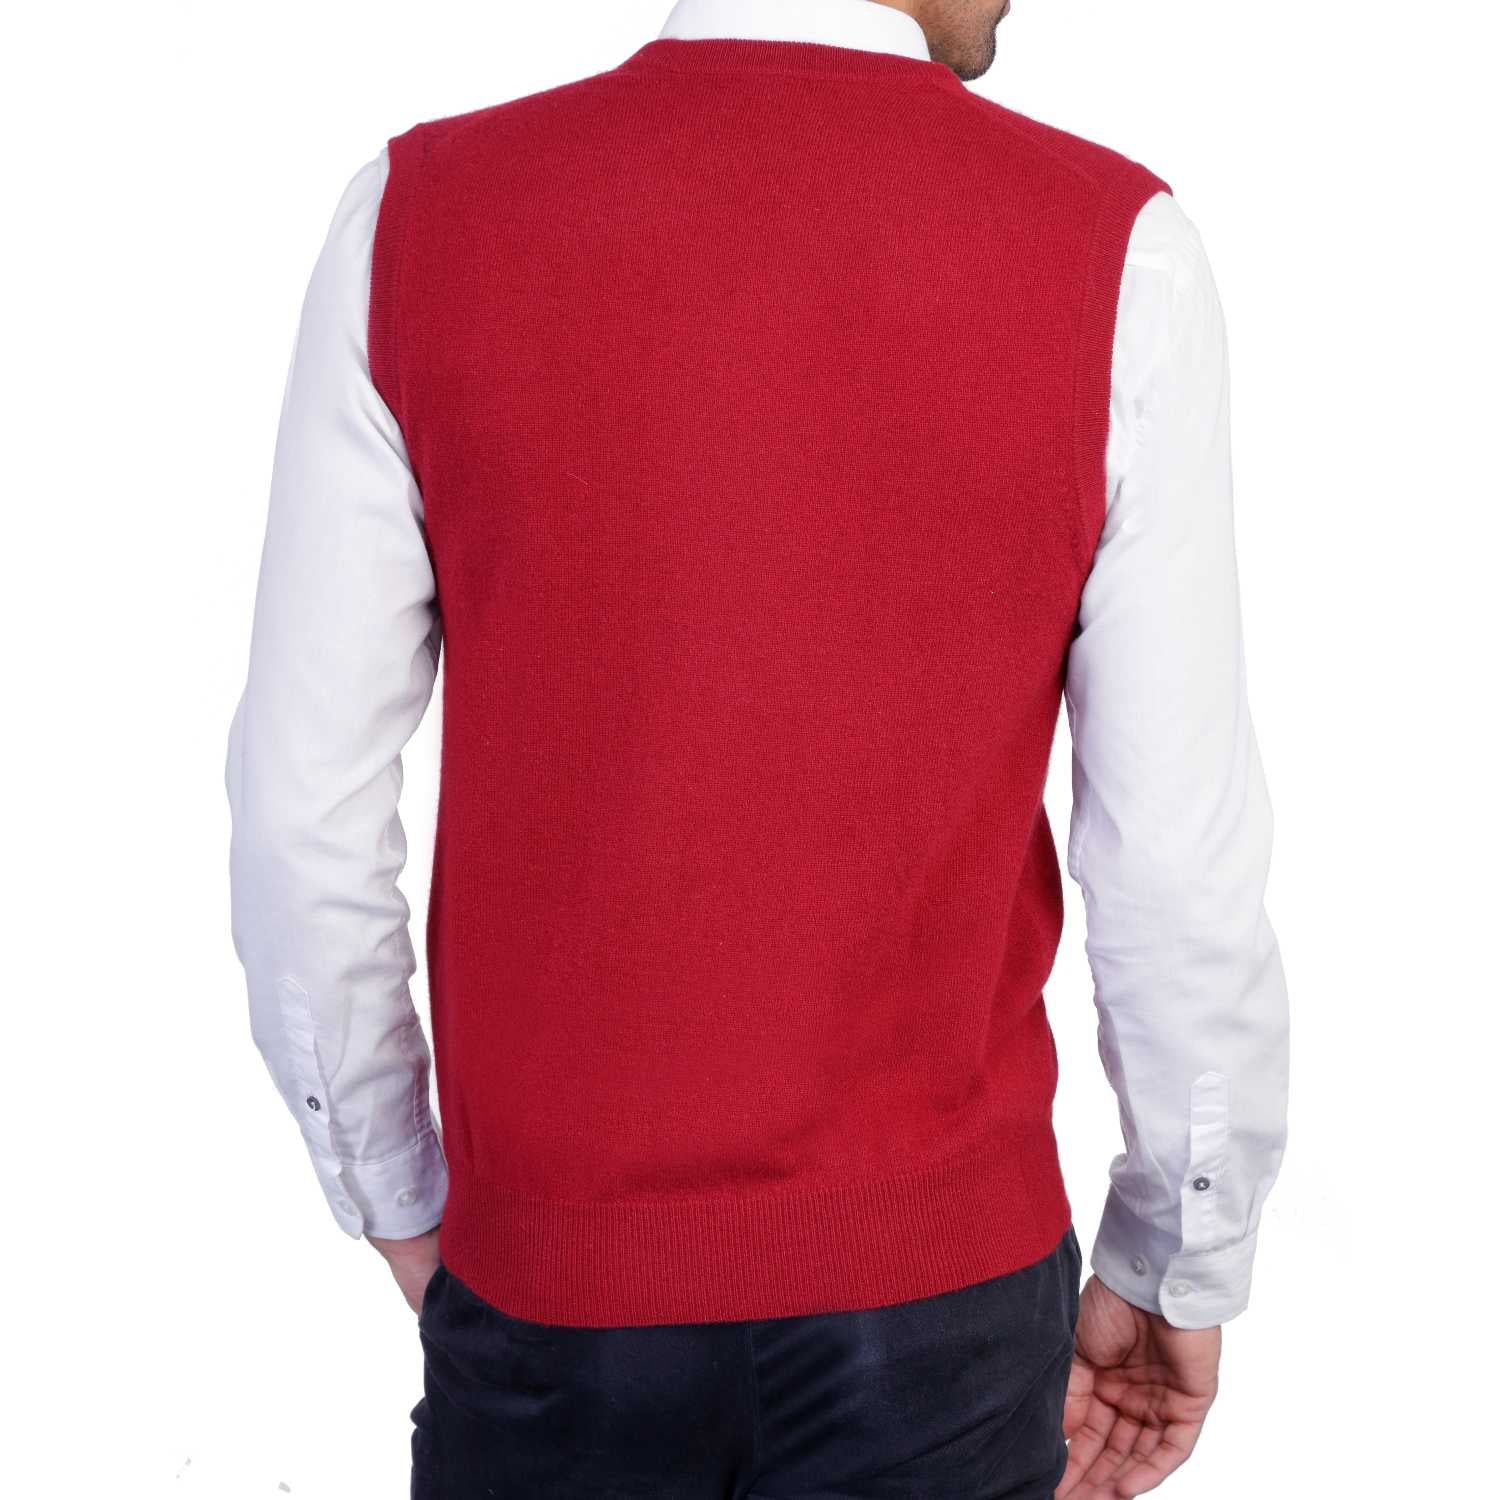 Mens Burgundy Wine Cashmere Sleeveless Vest Sweater | Back | Shop at The Cashmere Choice | London